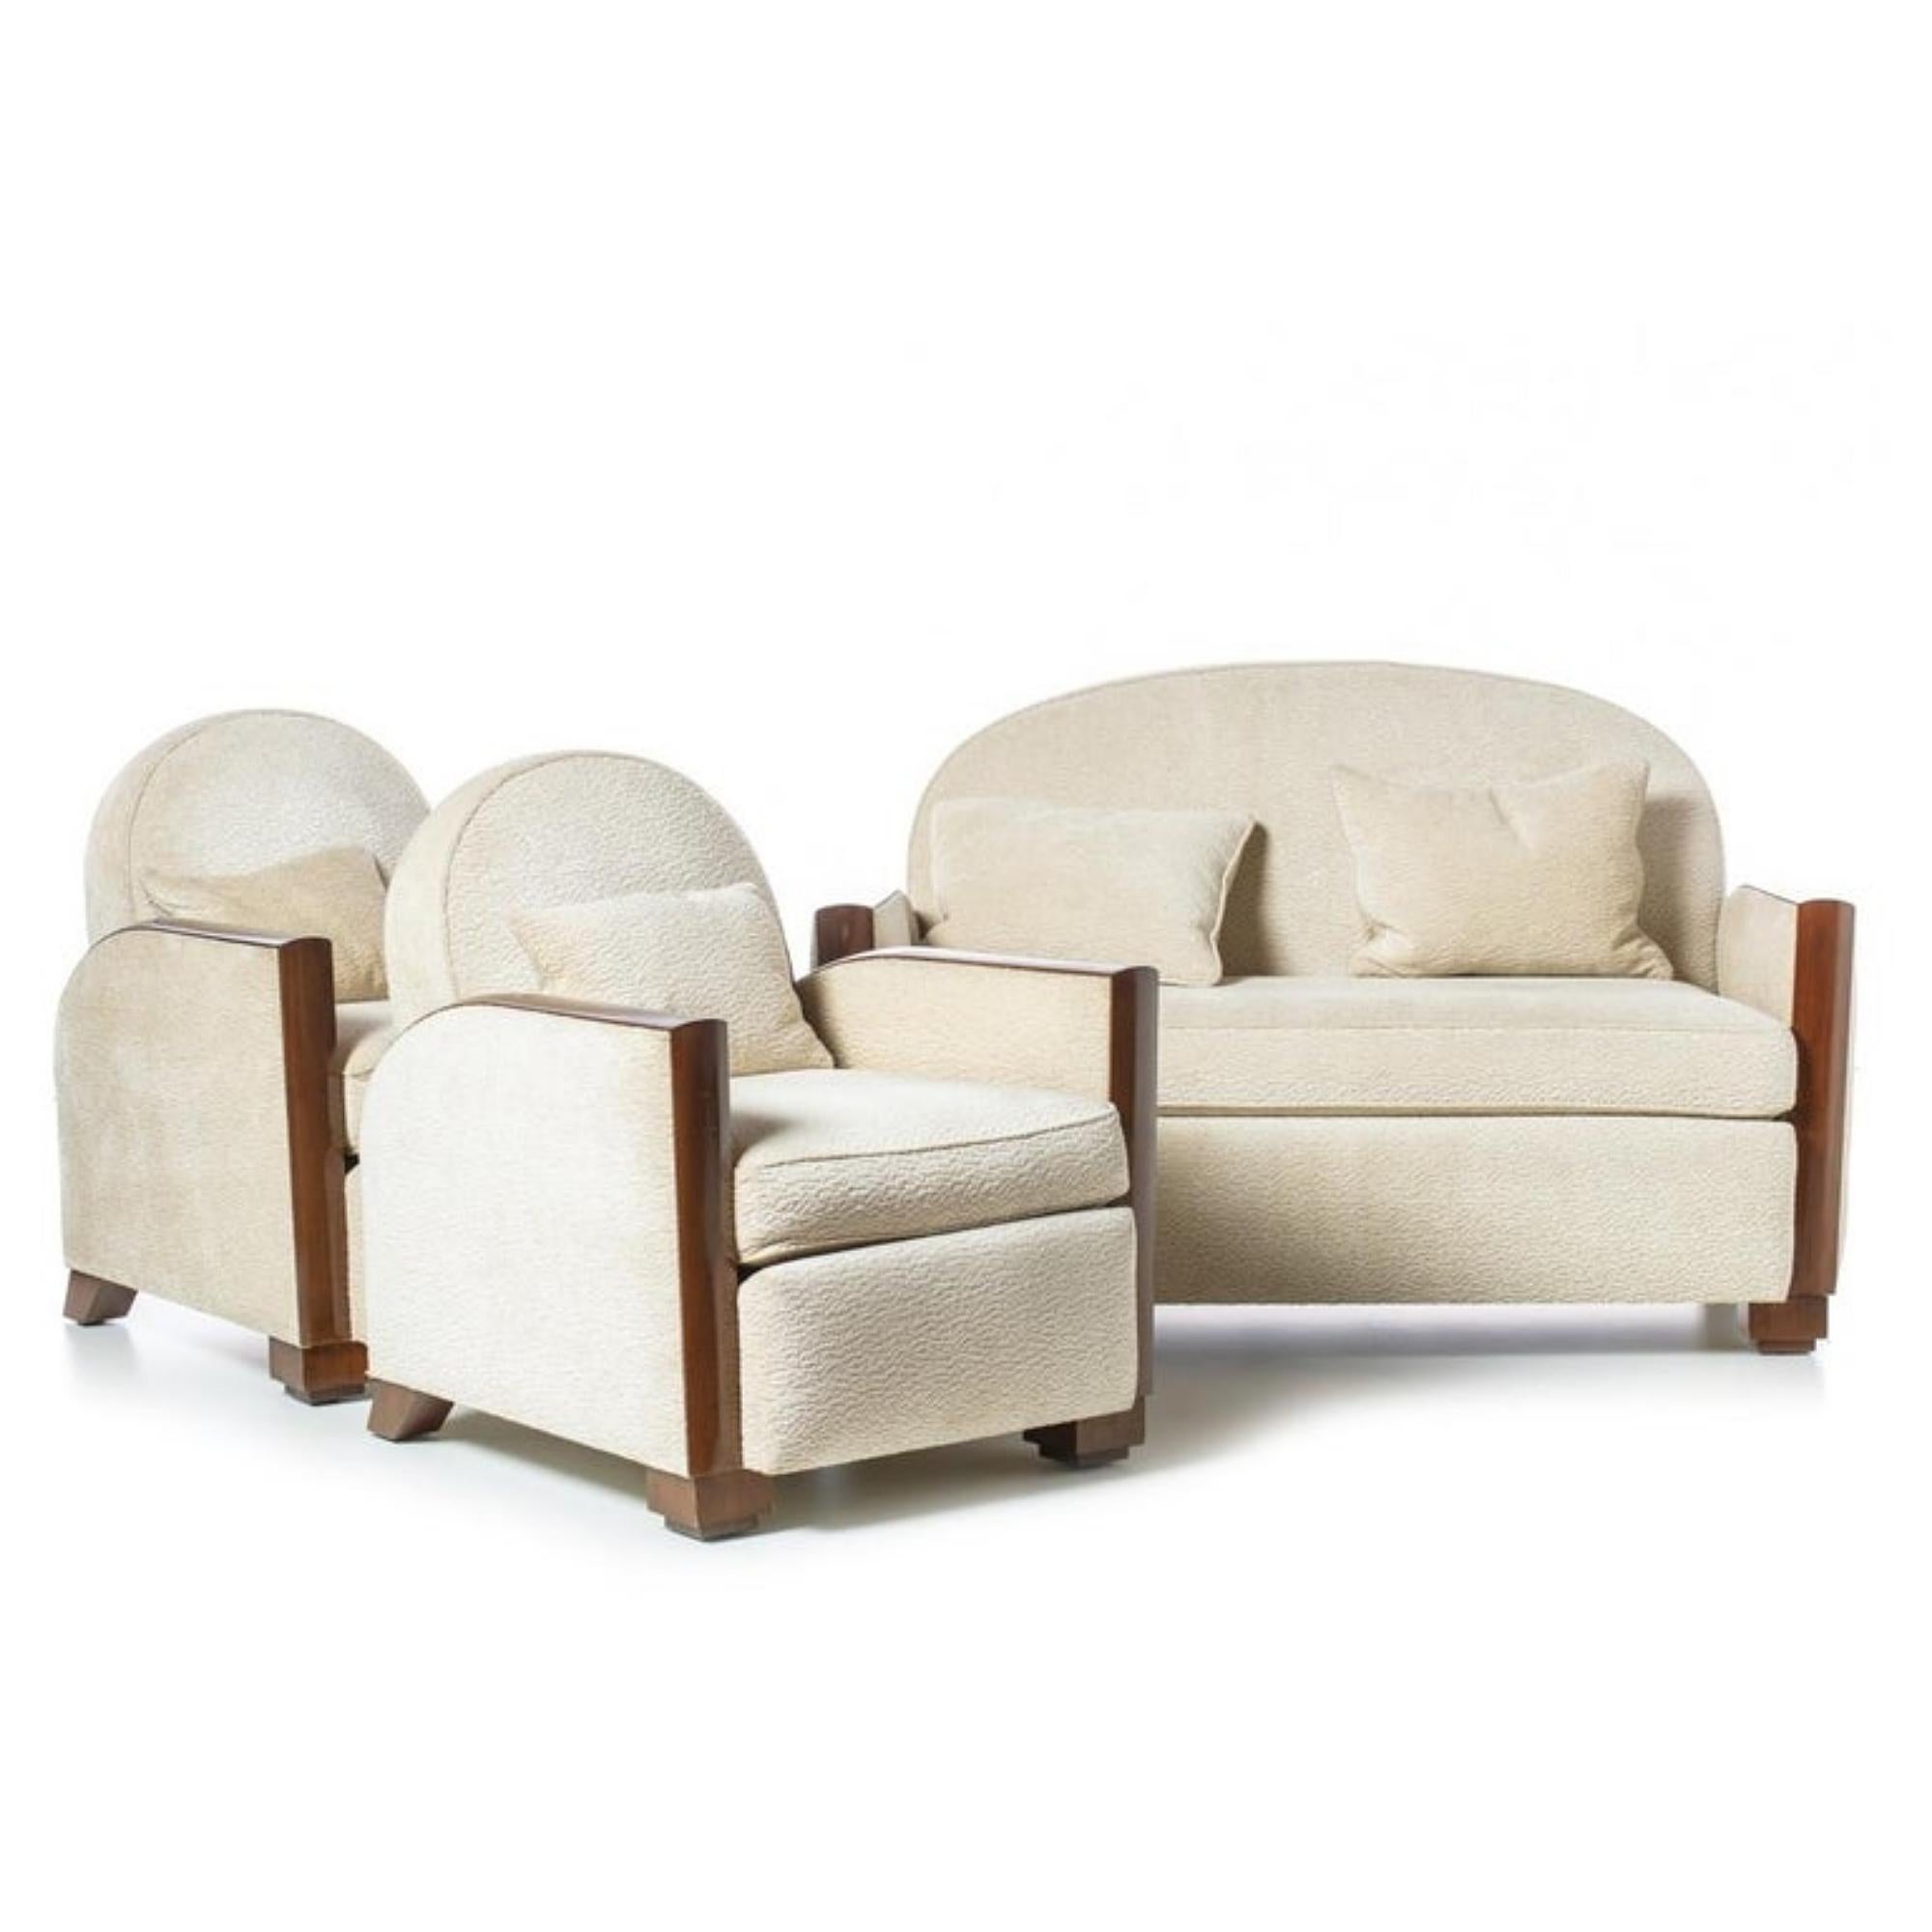 Hand-Crafted Art Deco Sofa Set, French, 20th Century